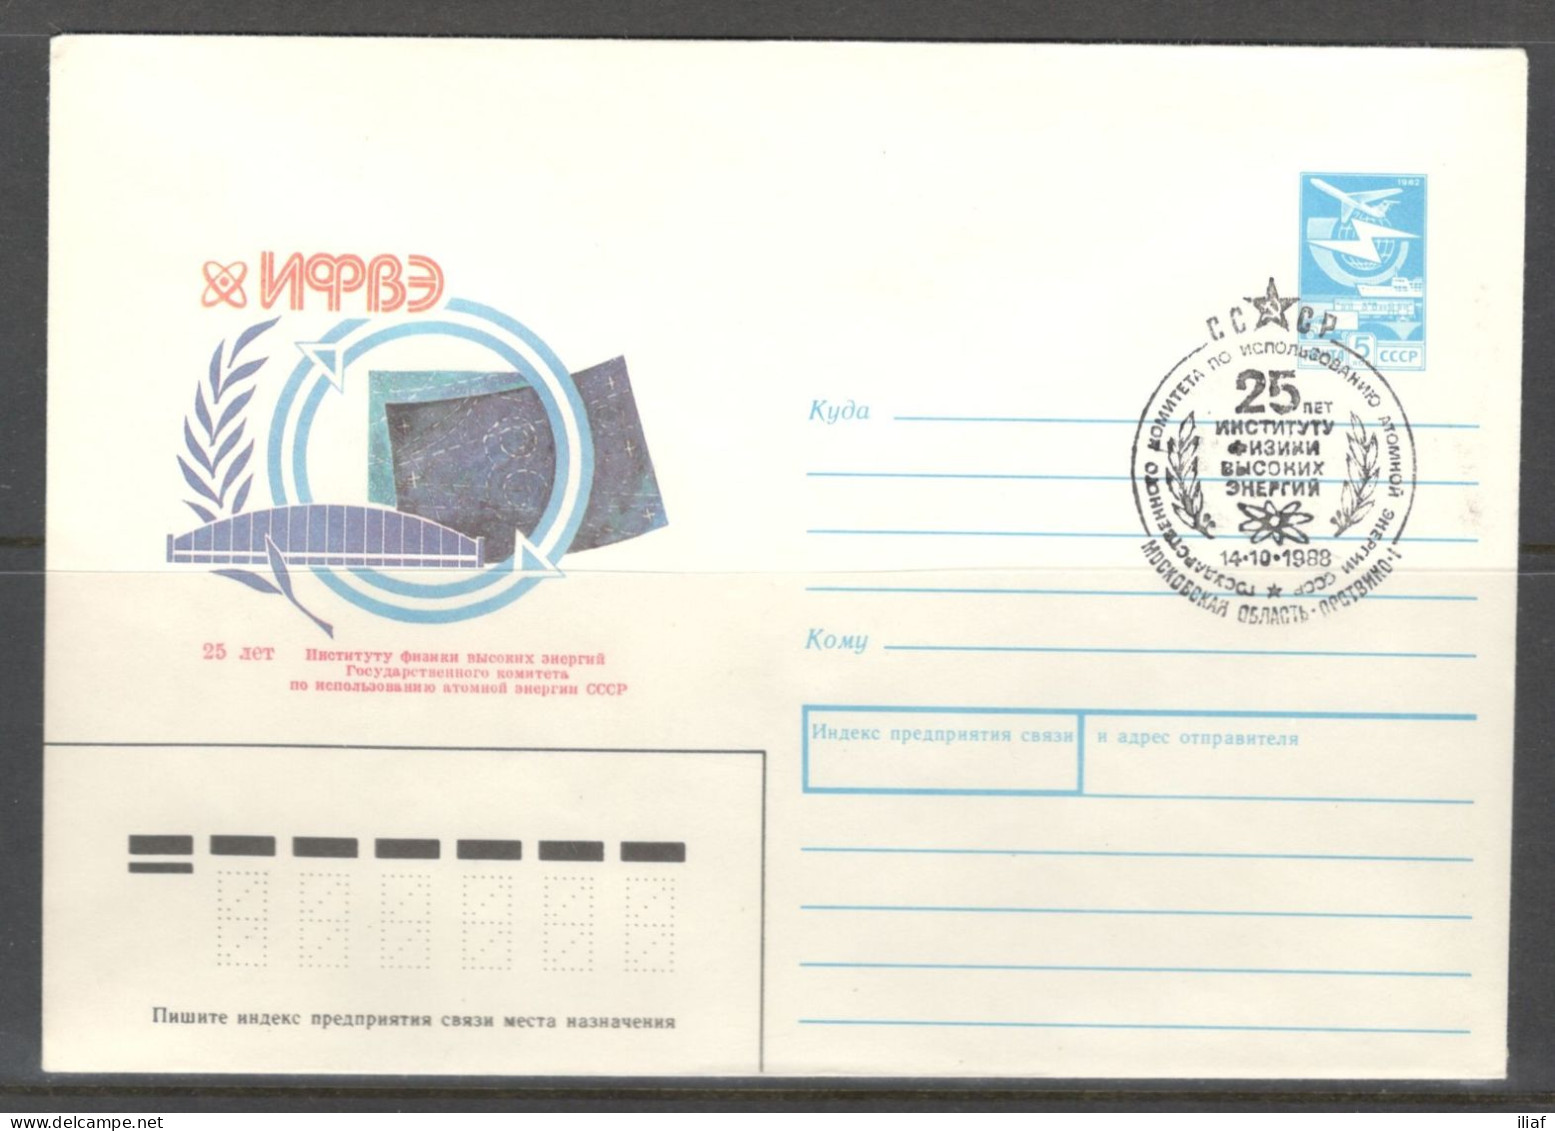 RUSSIA & USSR. 25th Anniversary Of The Institute For High Energy Physics. Illustrated Envelope With Special Cancellation - Atom